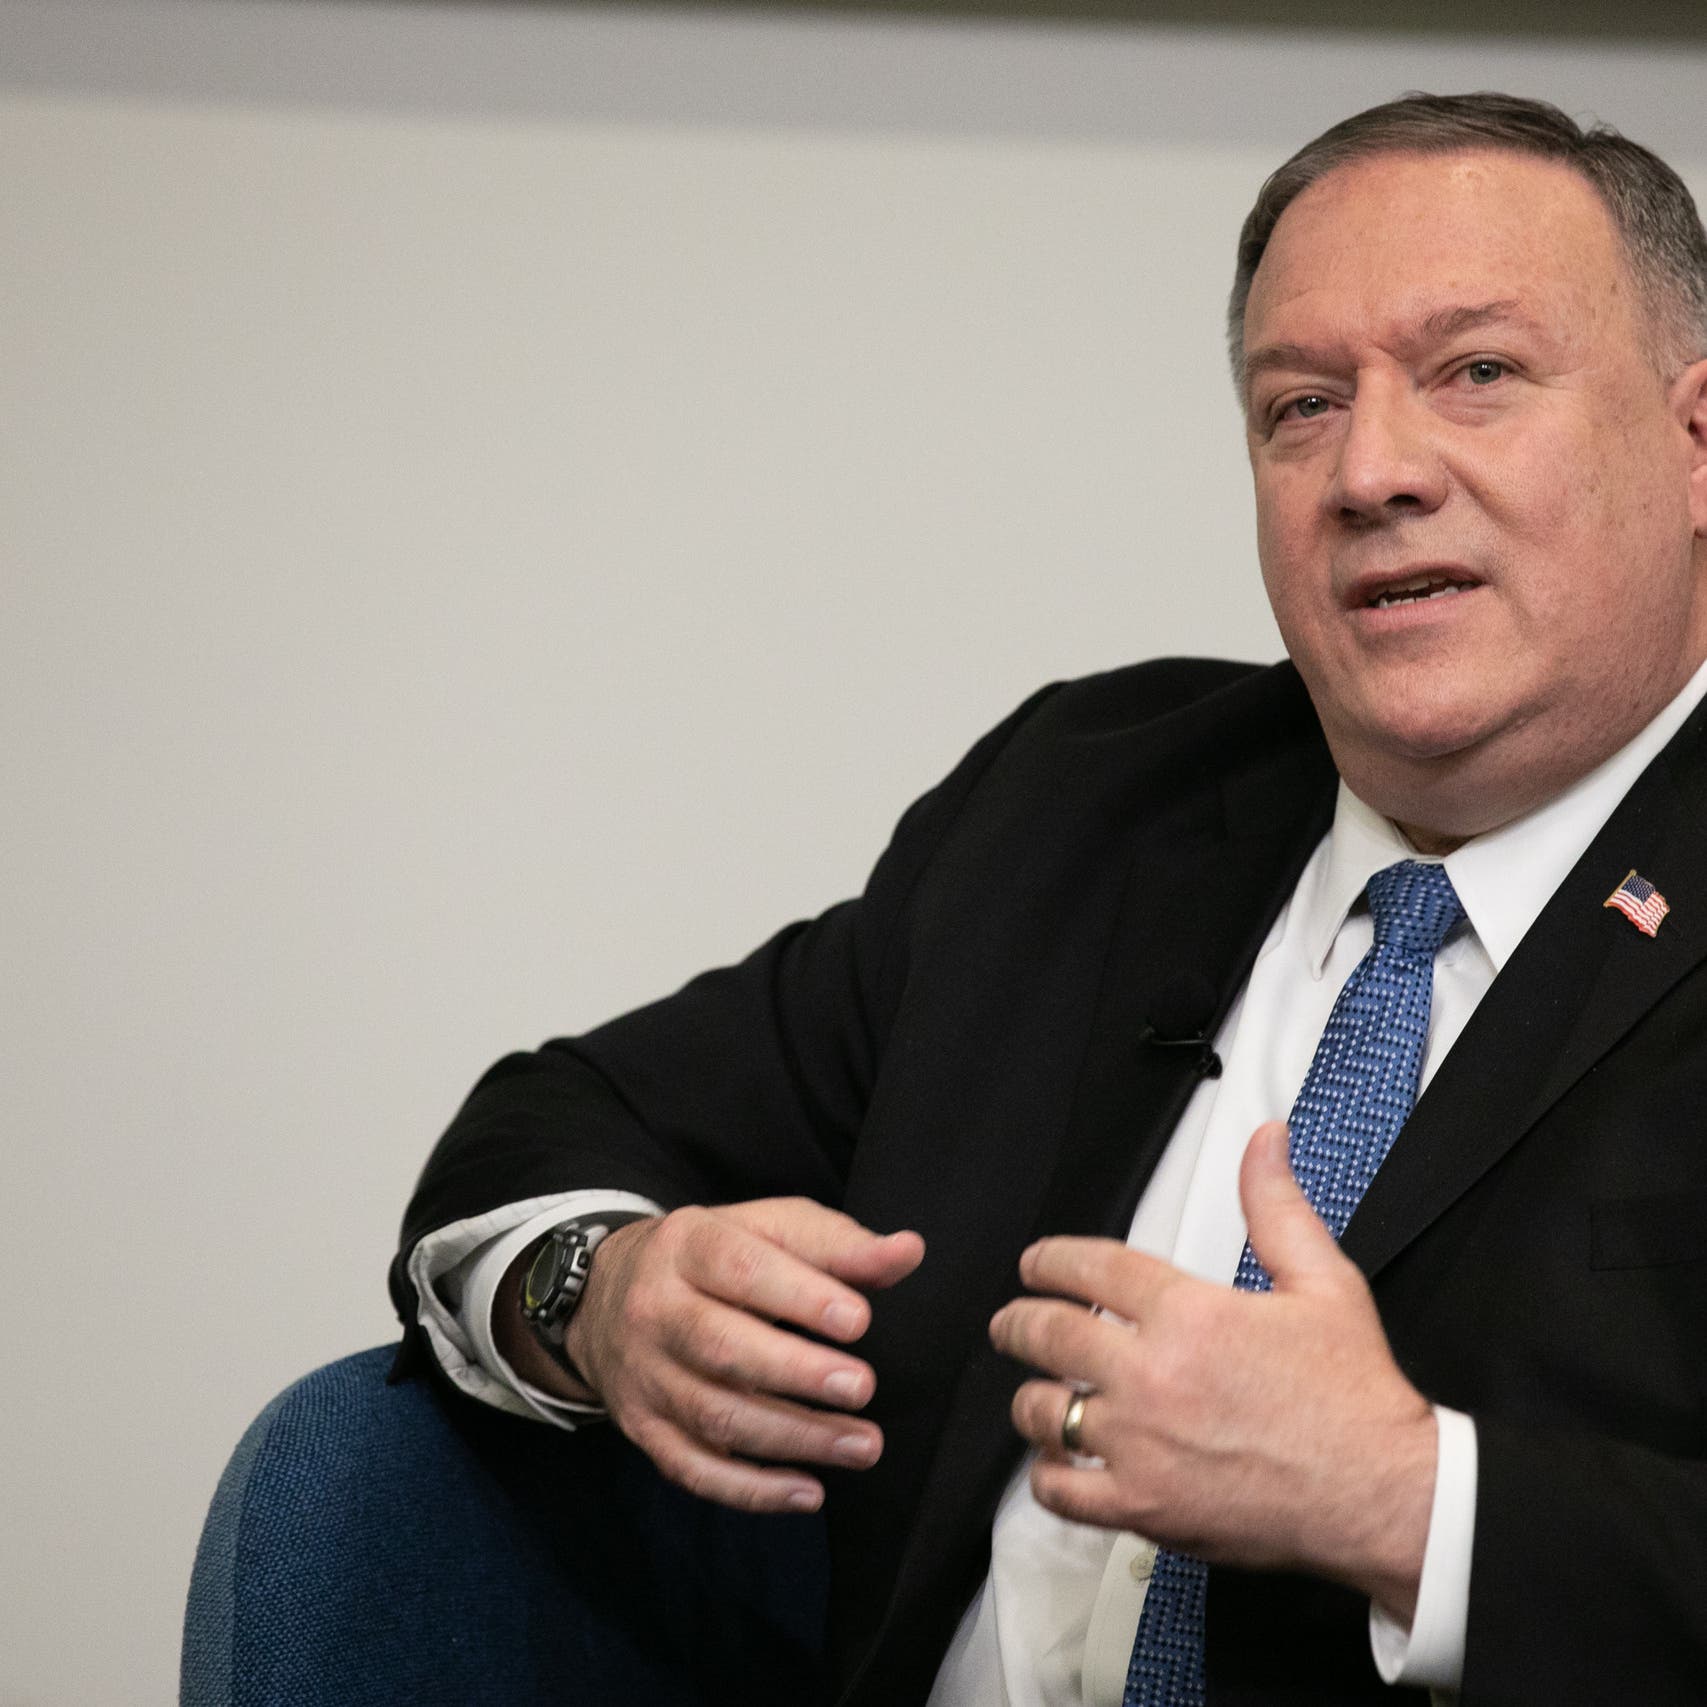 Pompeo: Sanctions cut Iran's military budget by 24%